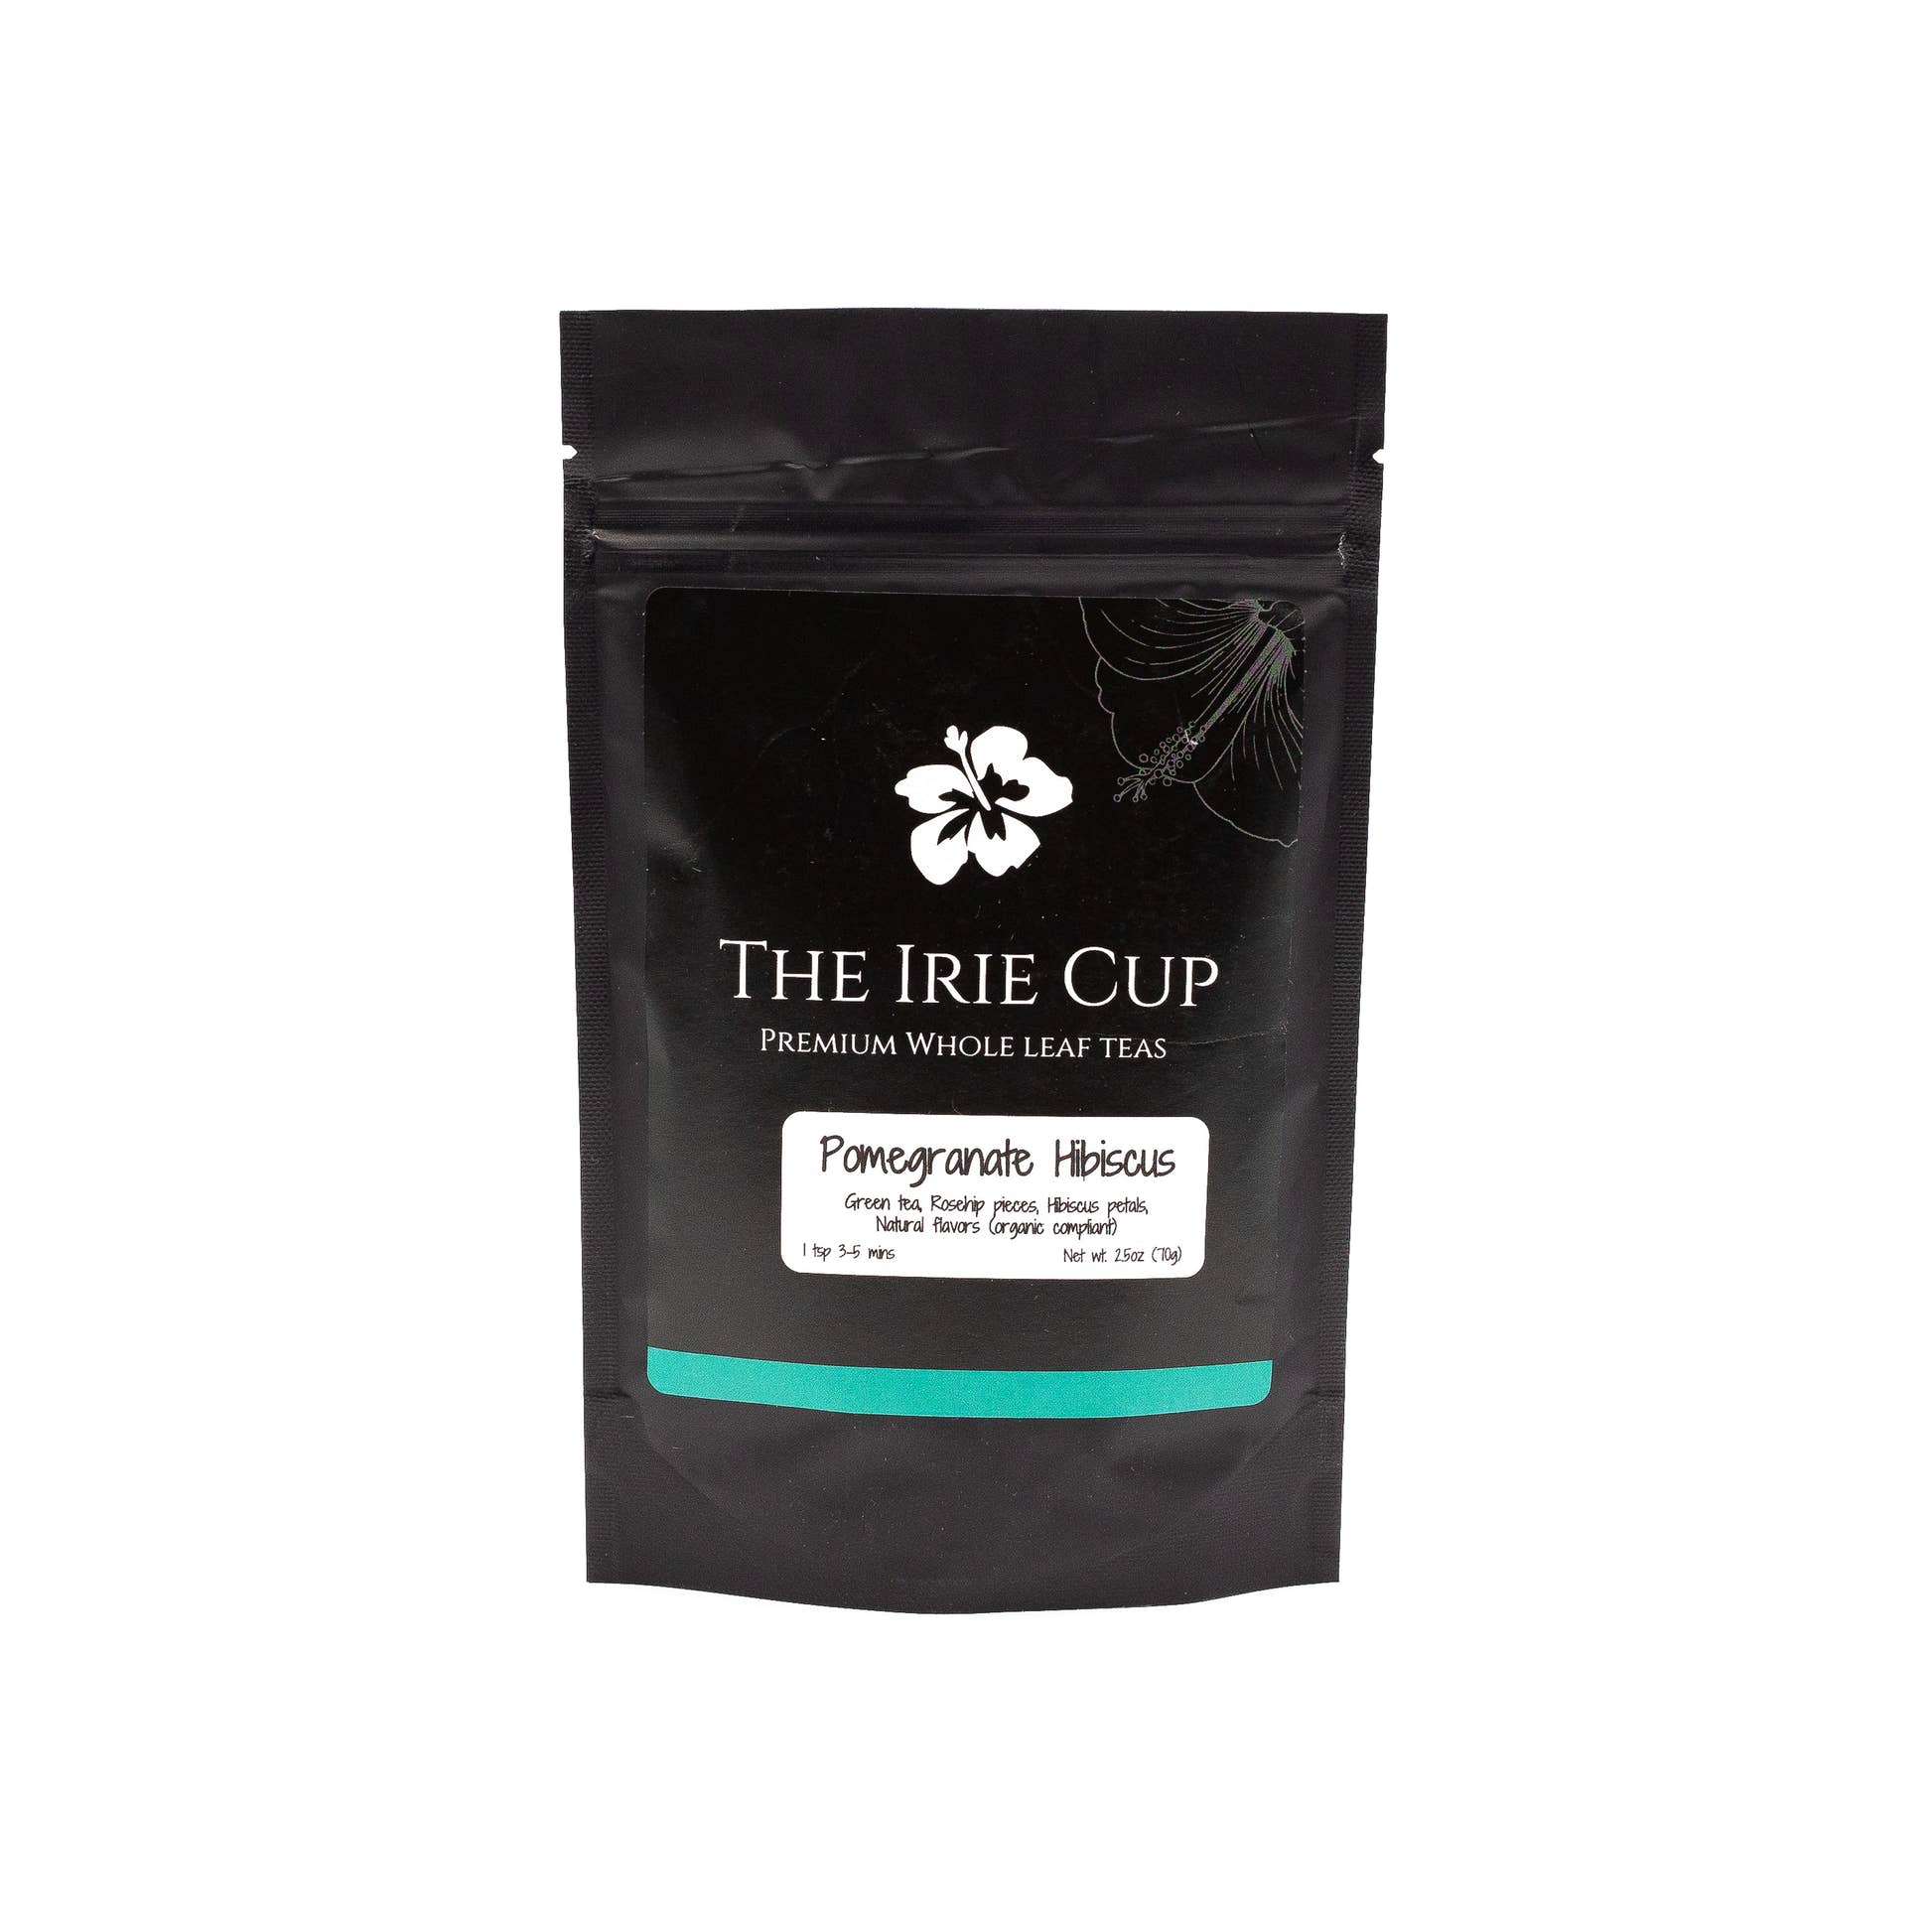 Pomegranate Hibiscus by The Irie Cup Premium Whole Leaf Teas black pouch with green tea